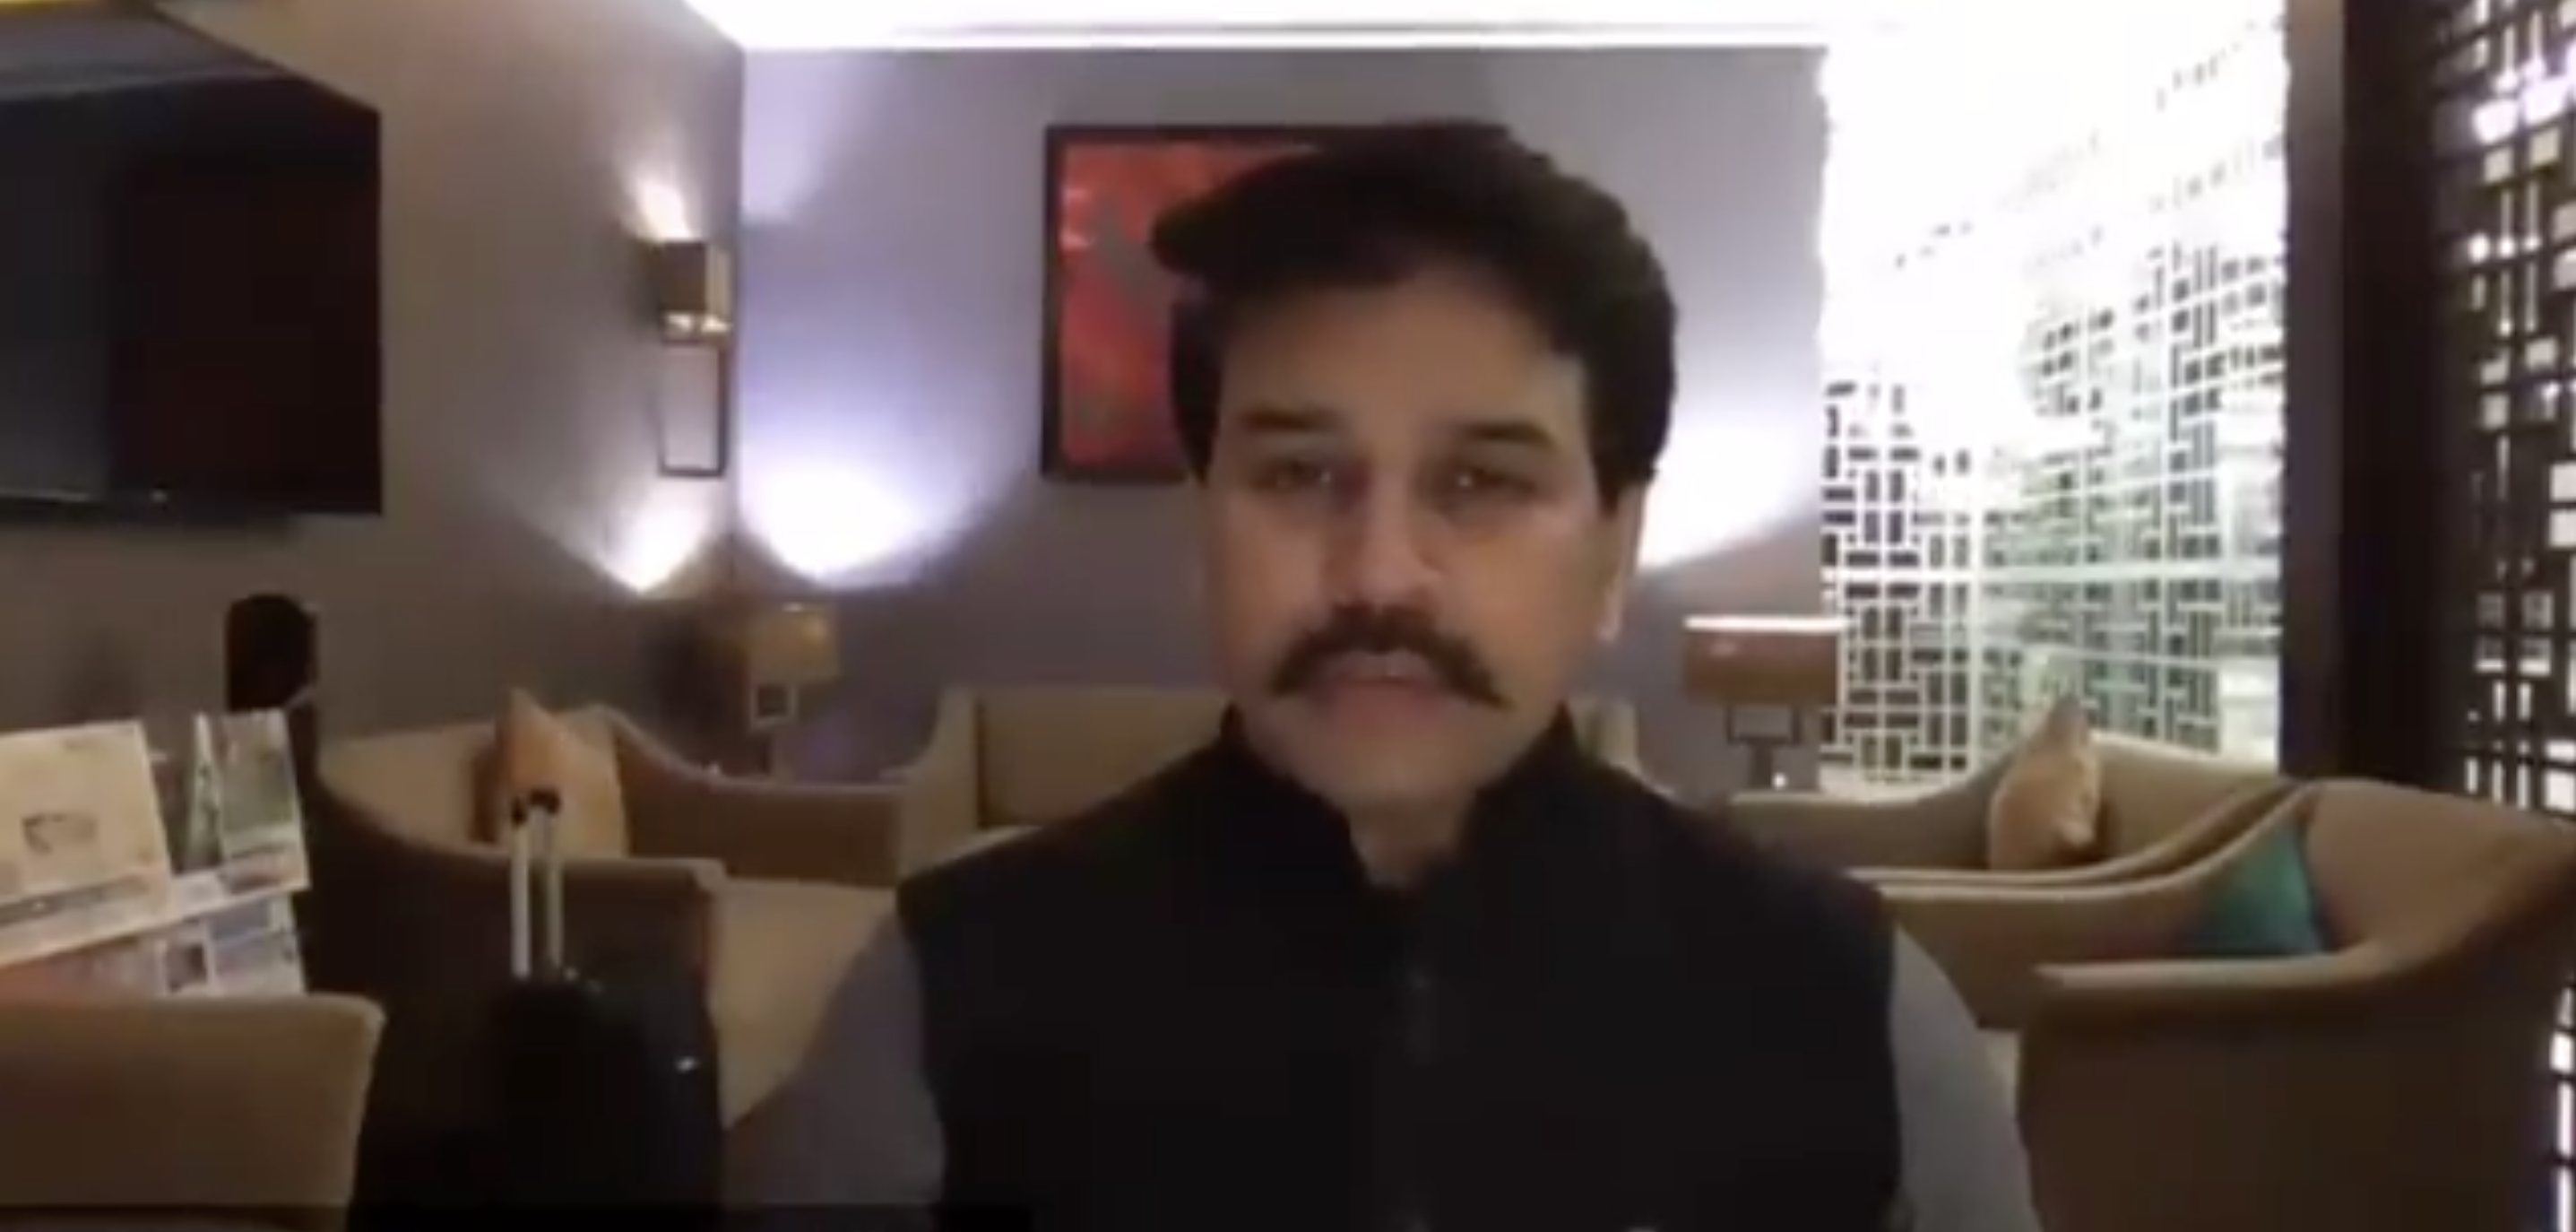 Anurag Thakur, India's Minister of Finance and Corporate Affairs